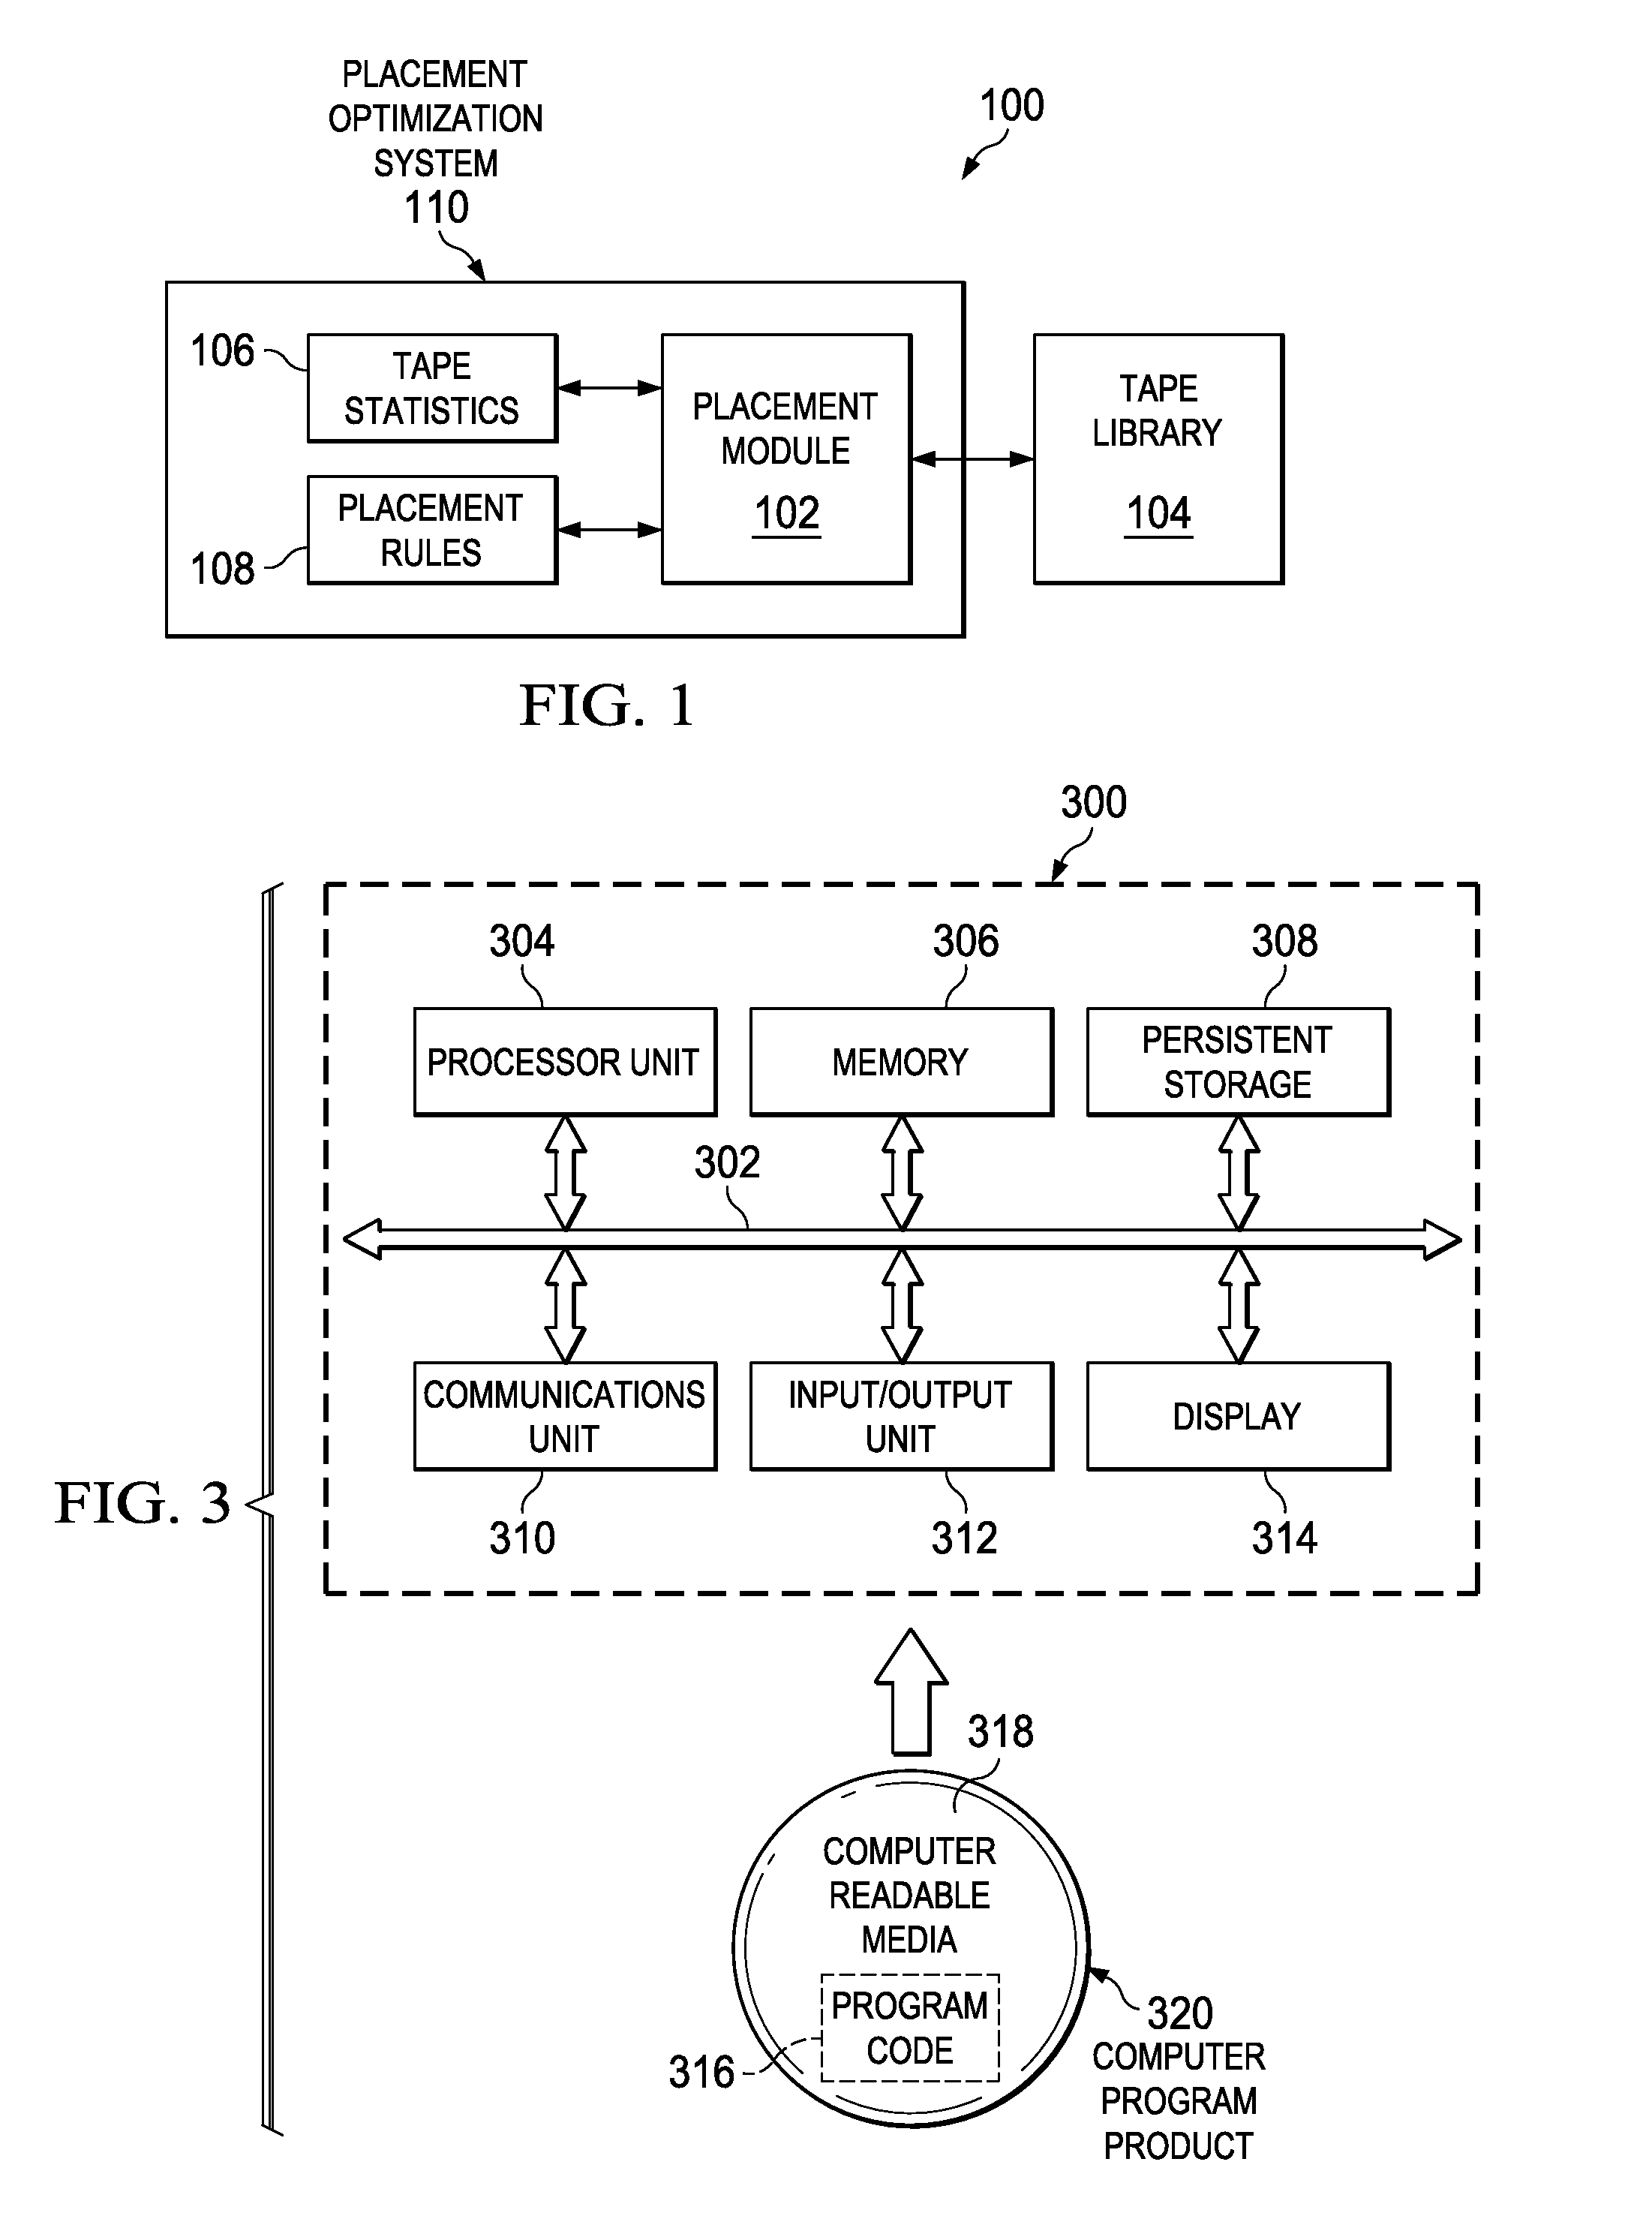 Balancing of data tape cartridges in tape libraries with pass-through mechanism